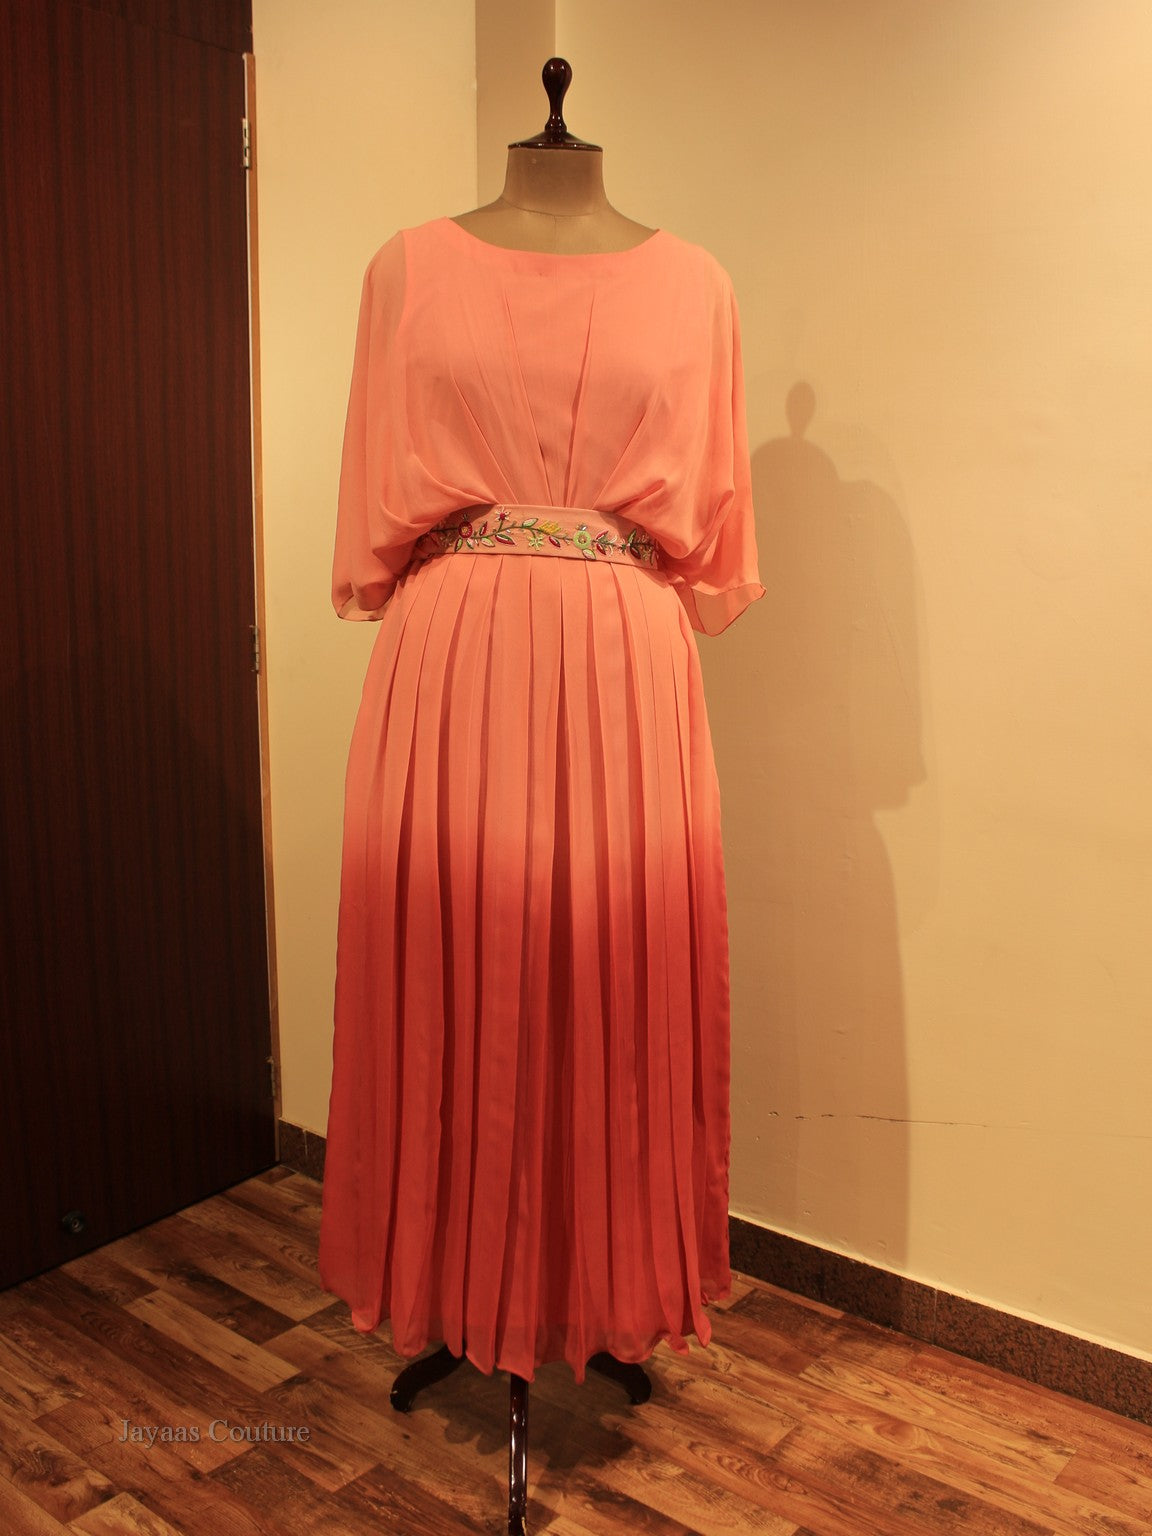 Rust shaded gown with belt